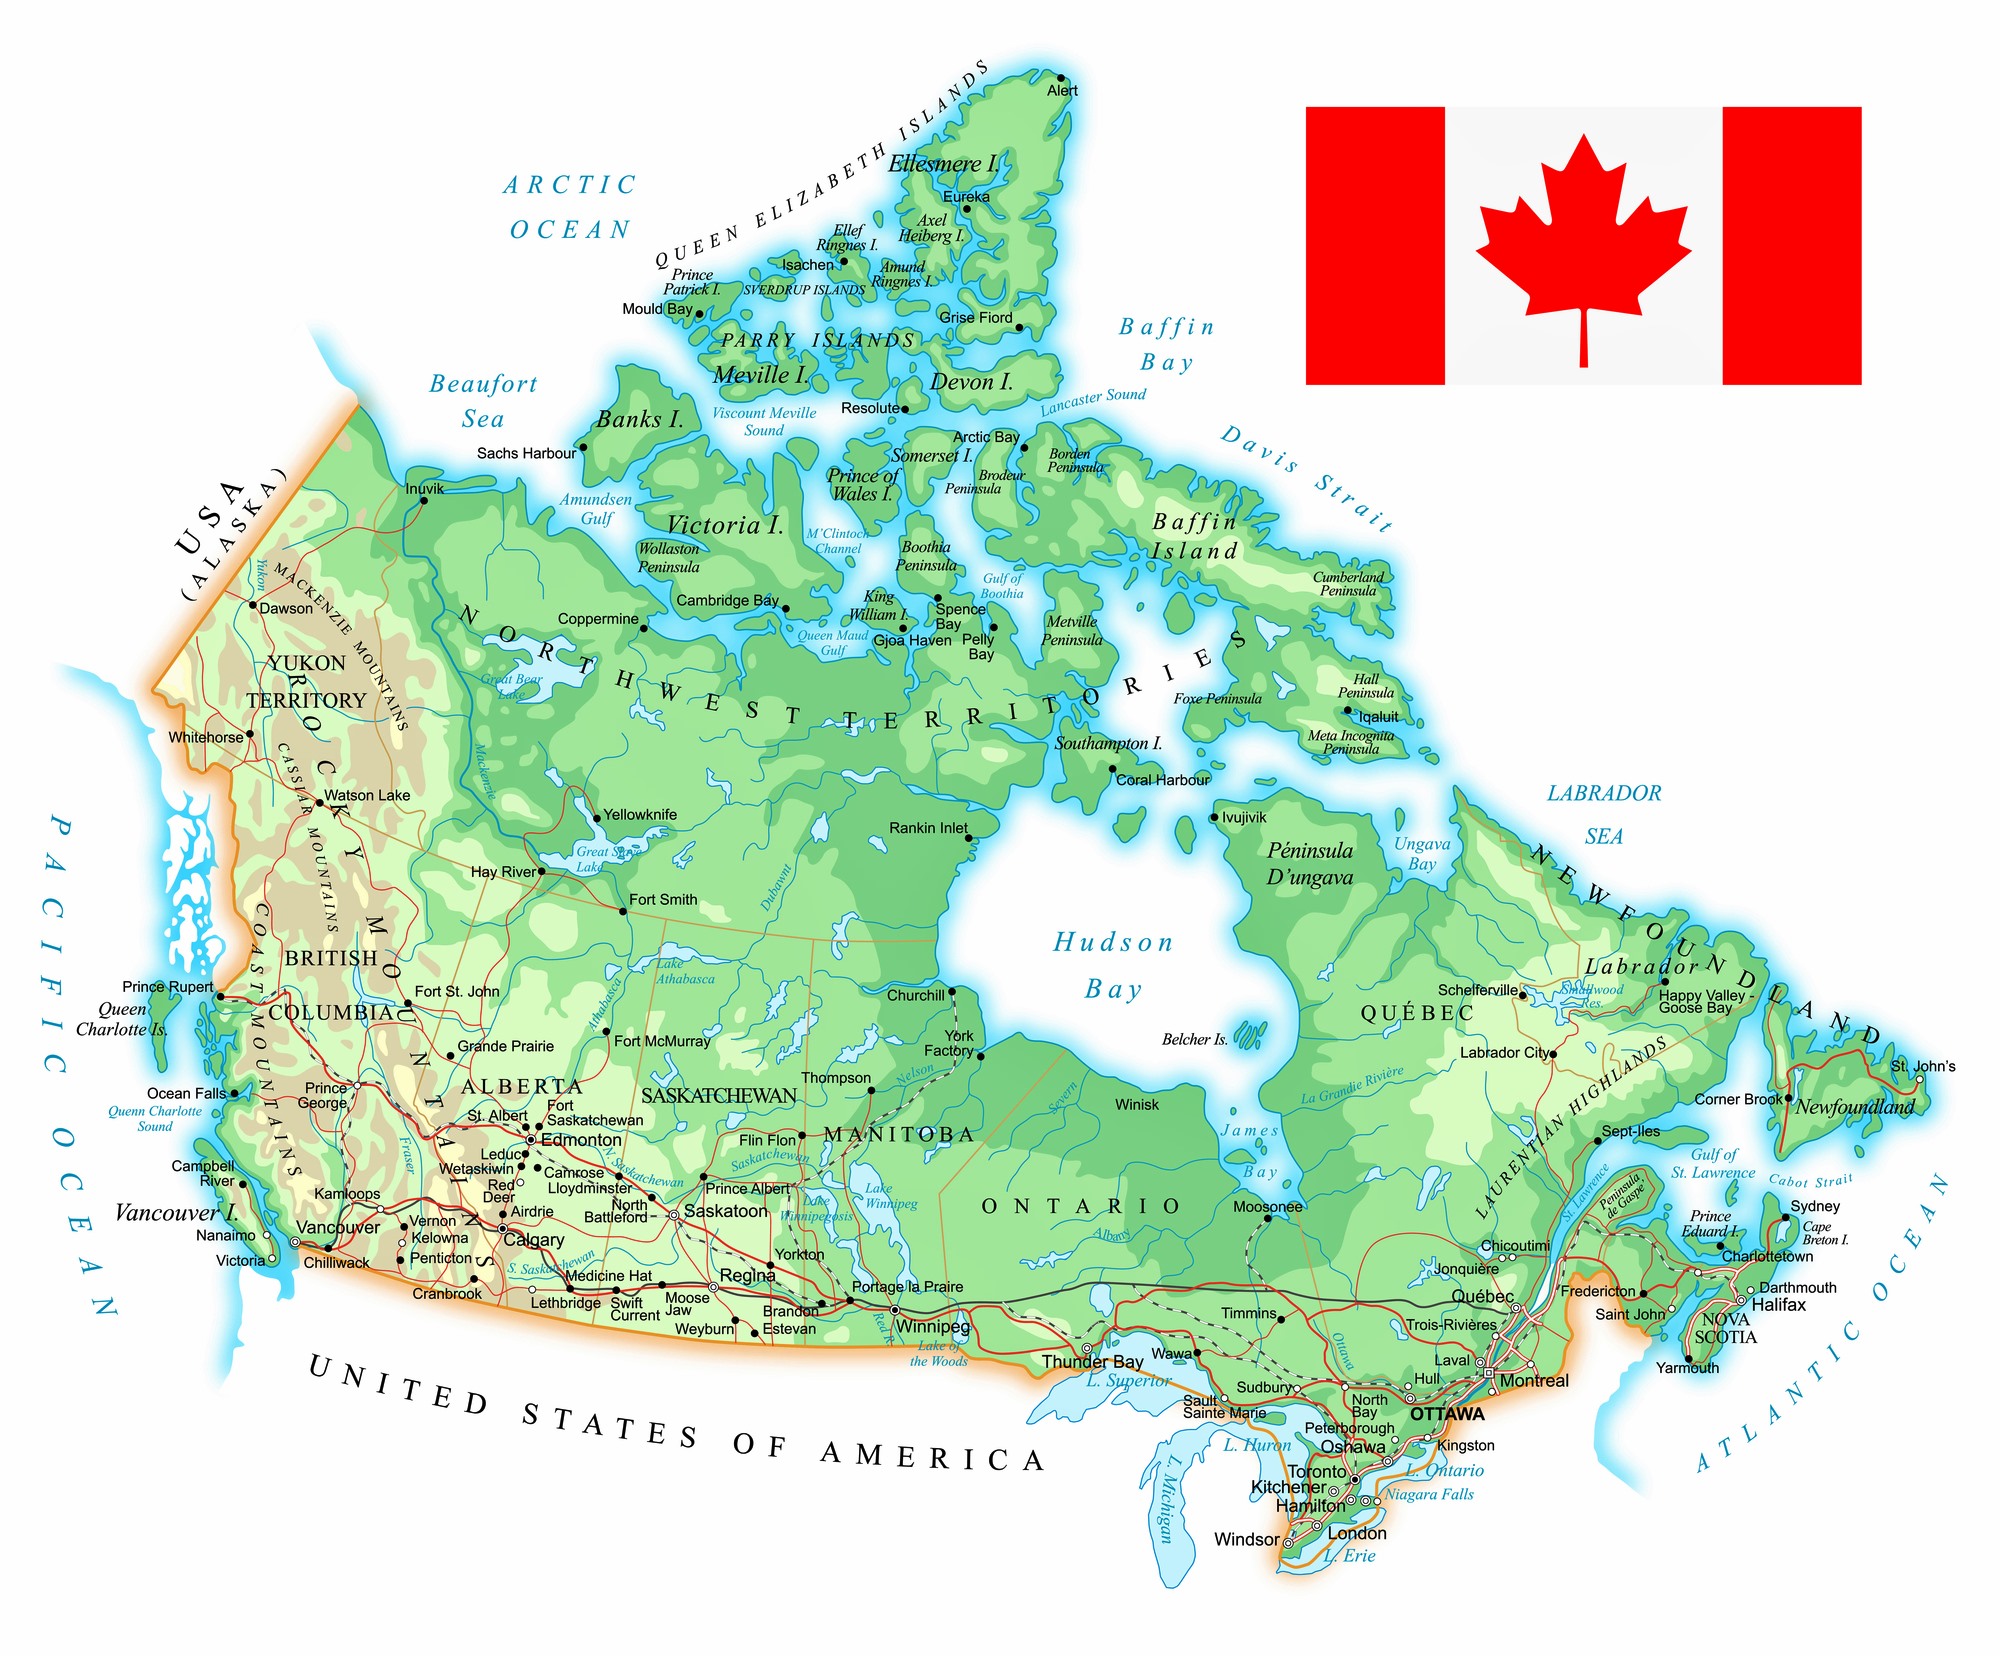 Canada Maps | Printable Maps of Canada for Download